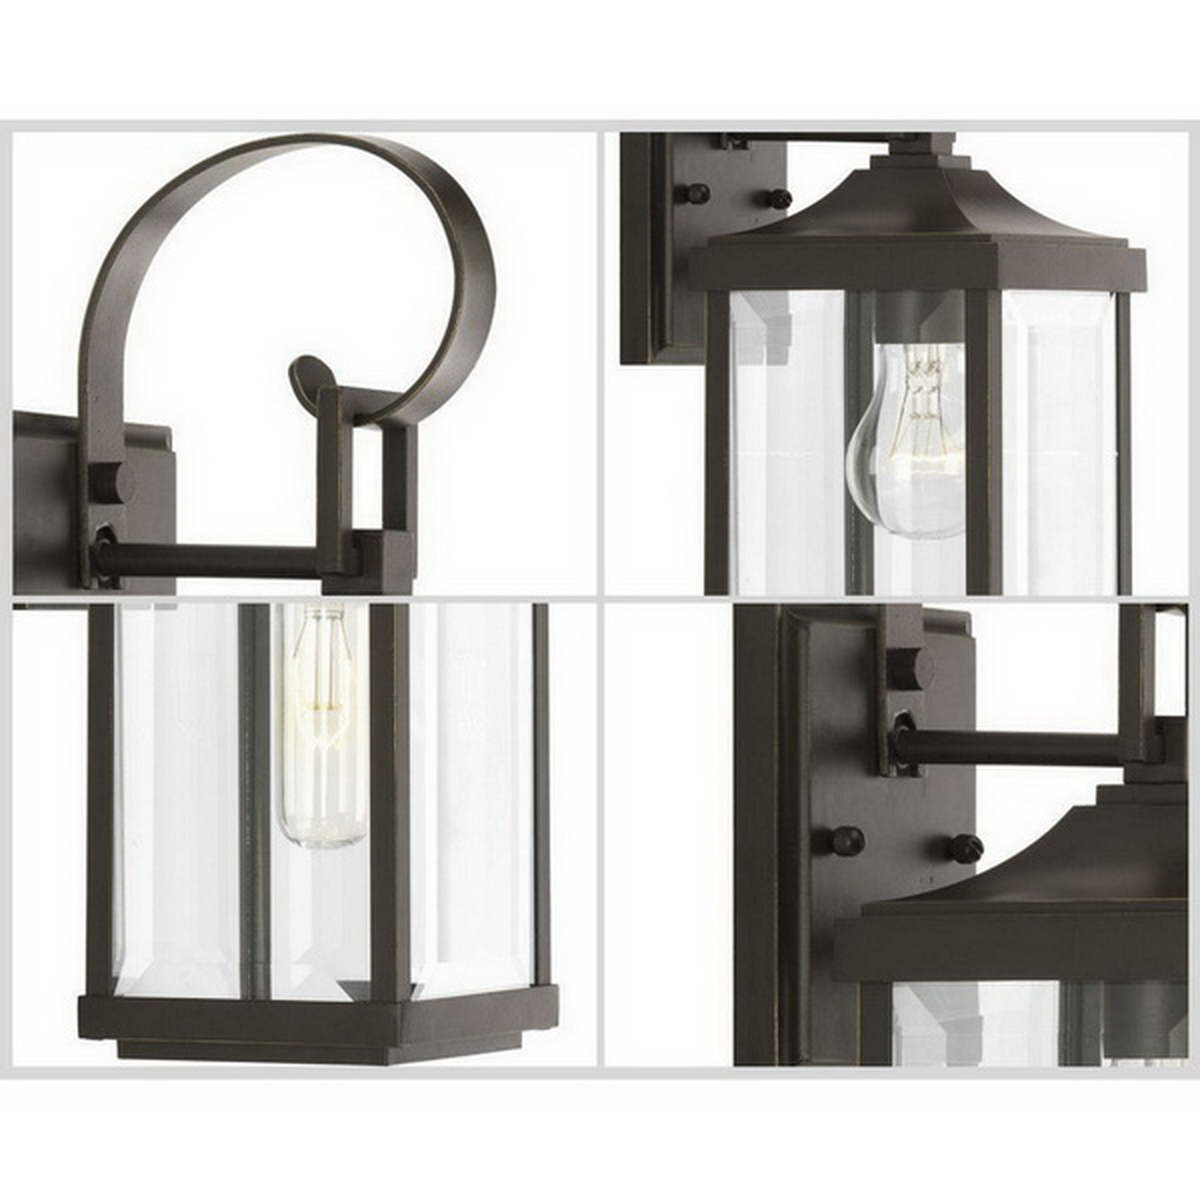 Gibbes Street 15 in. Outdoor Wall Light